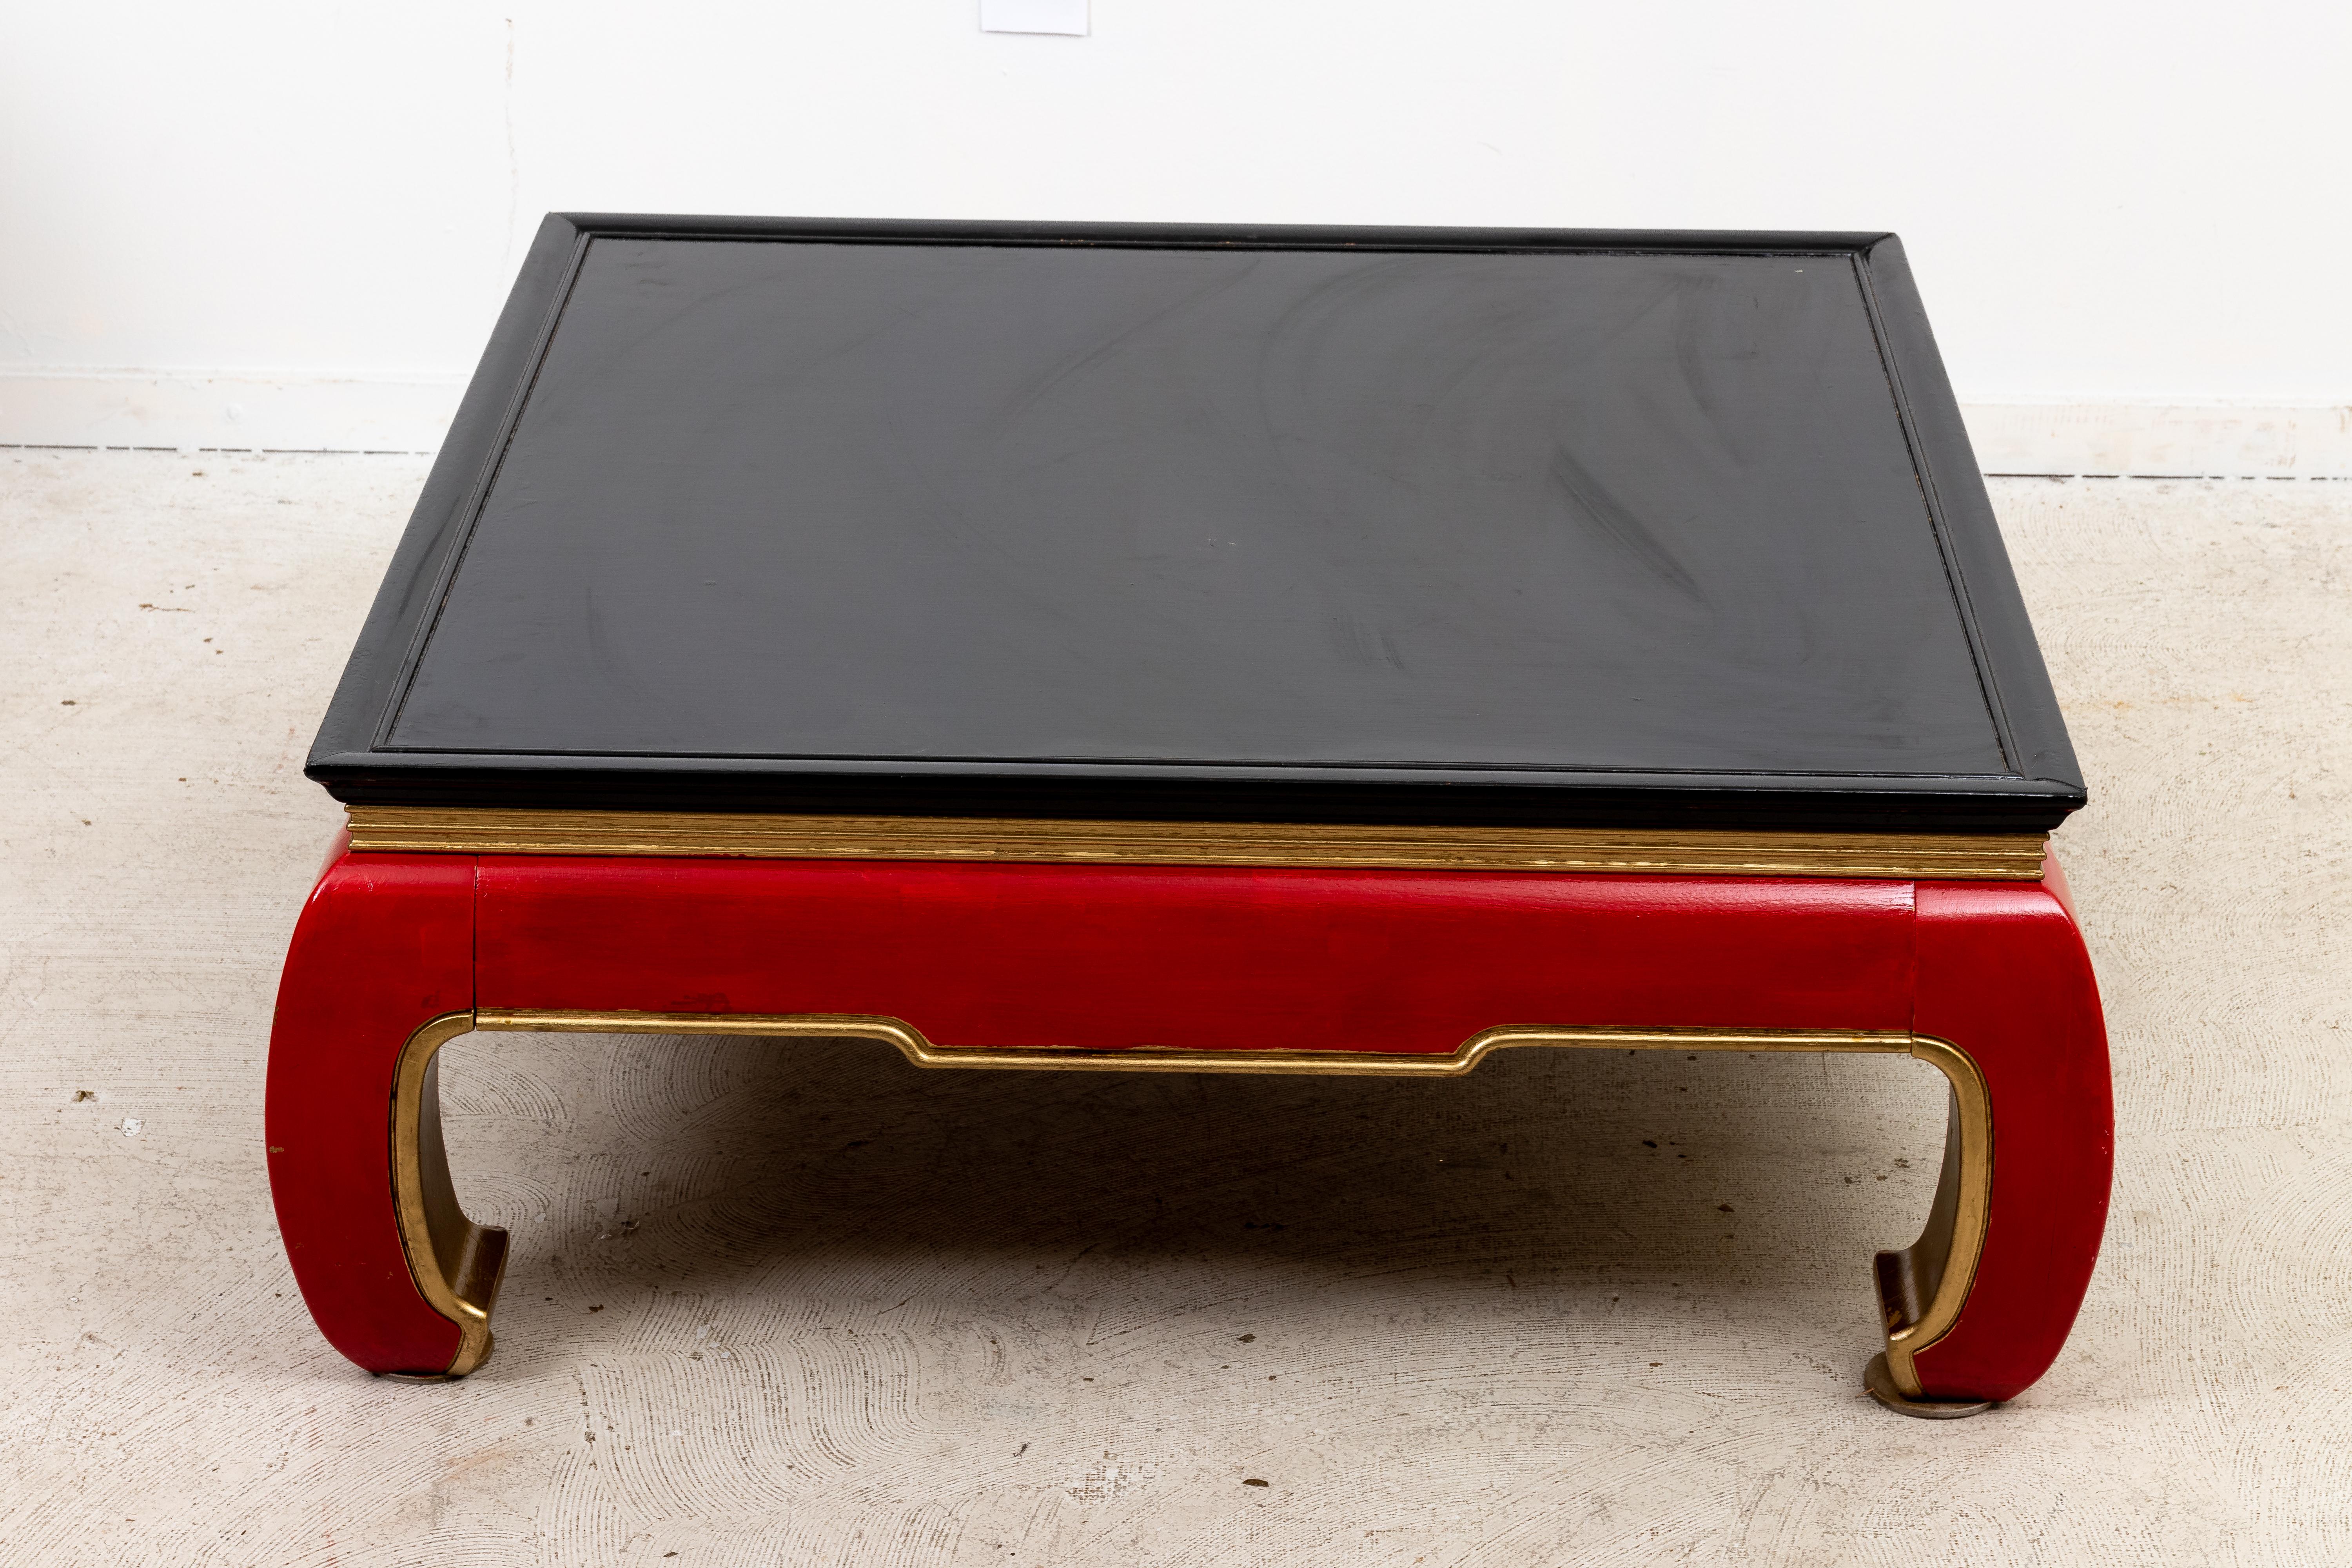 Asian Style square coffee table. Has been repainted at some point in black, red and gold. Some wear to painted finish. Nice overall condition.